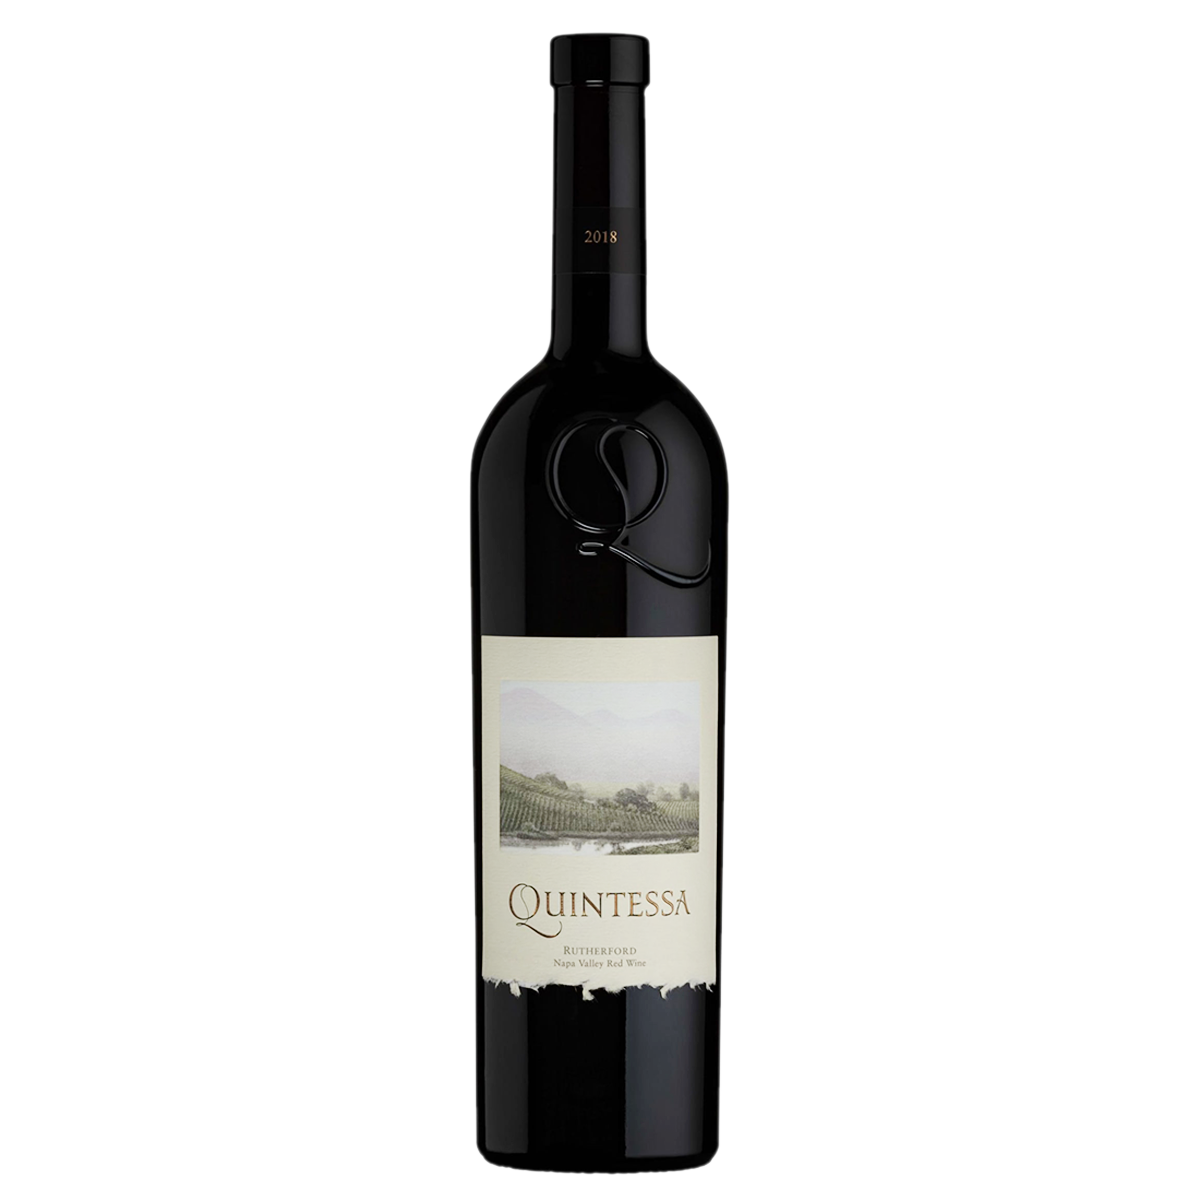 Offer: Highly acclaimed Quintessa 2018